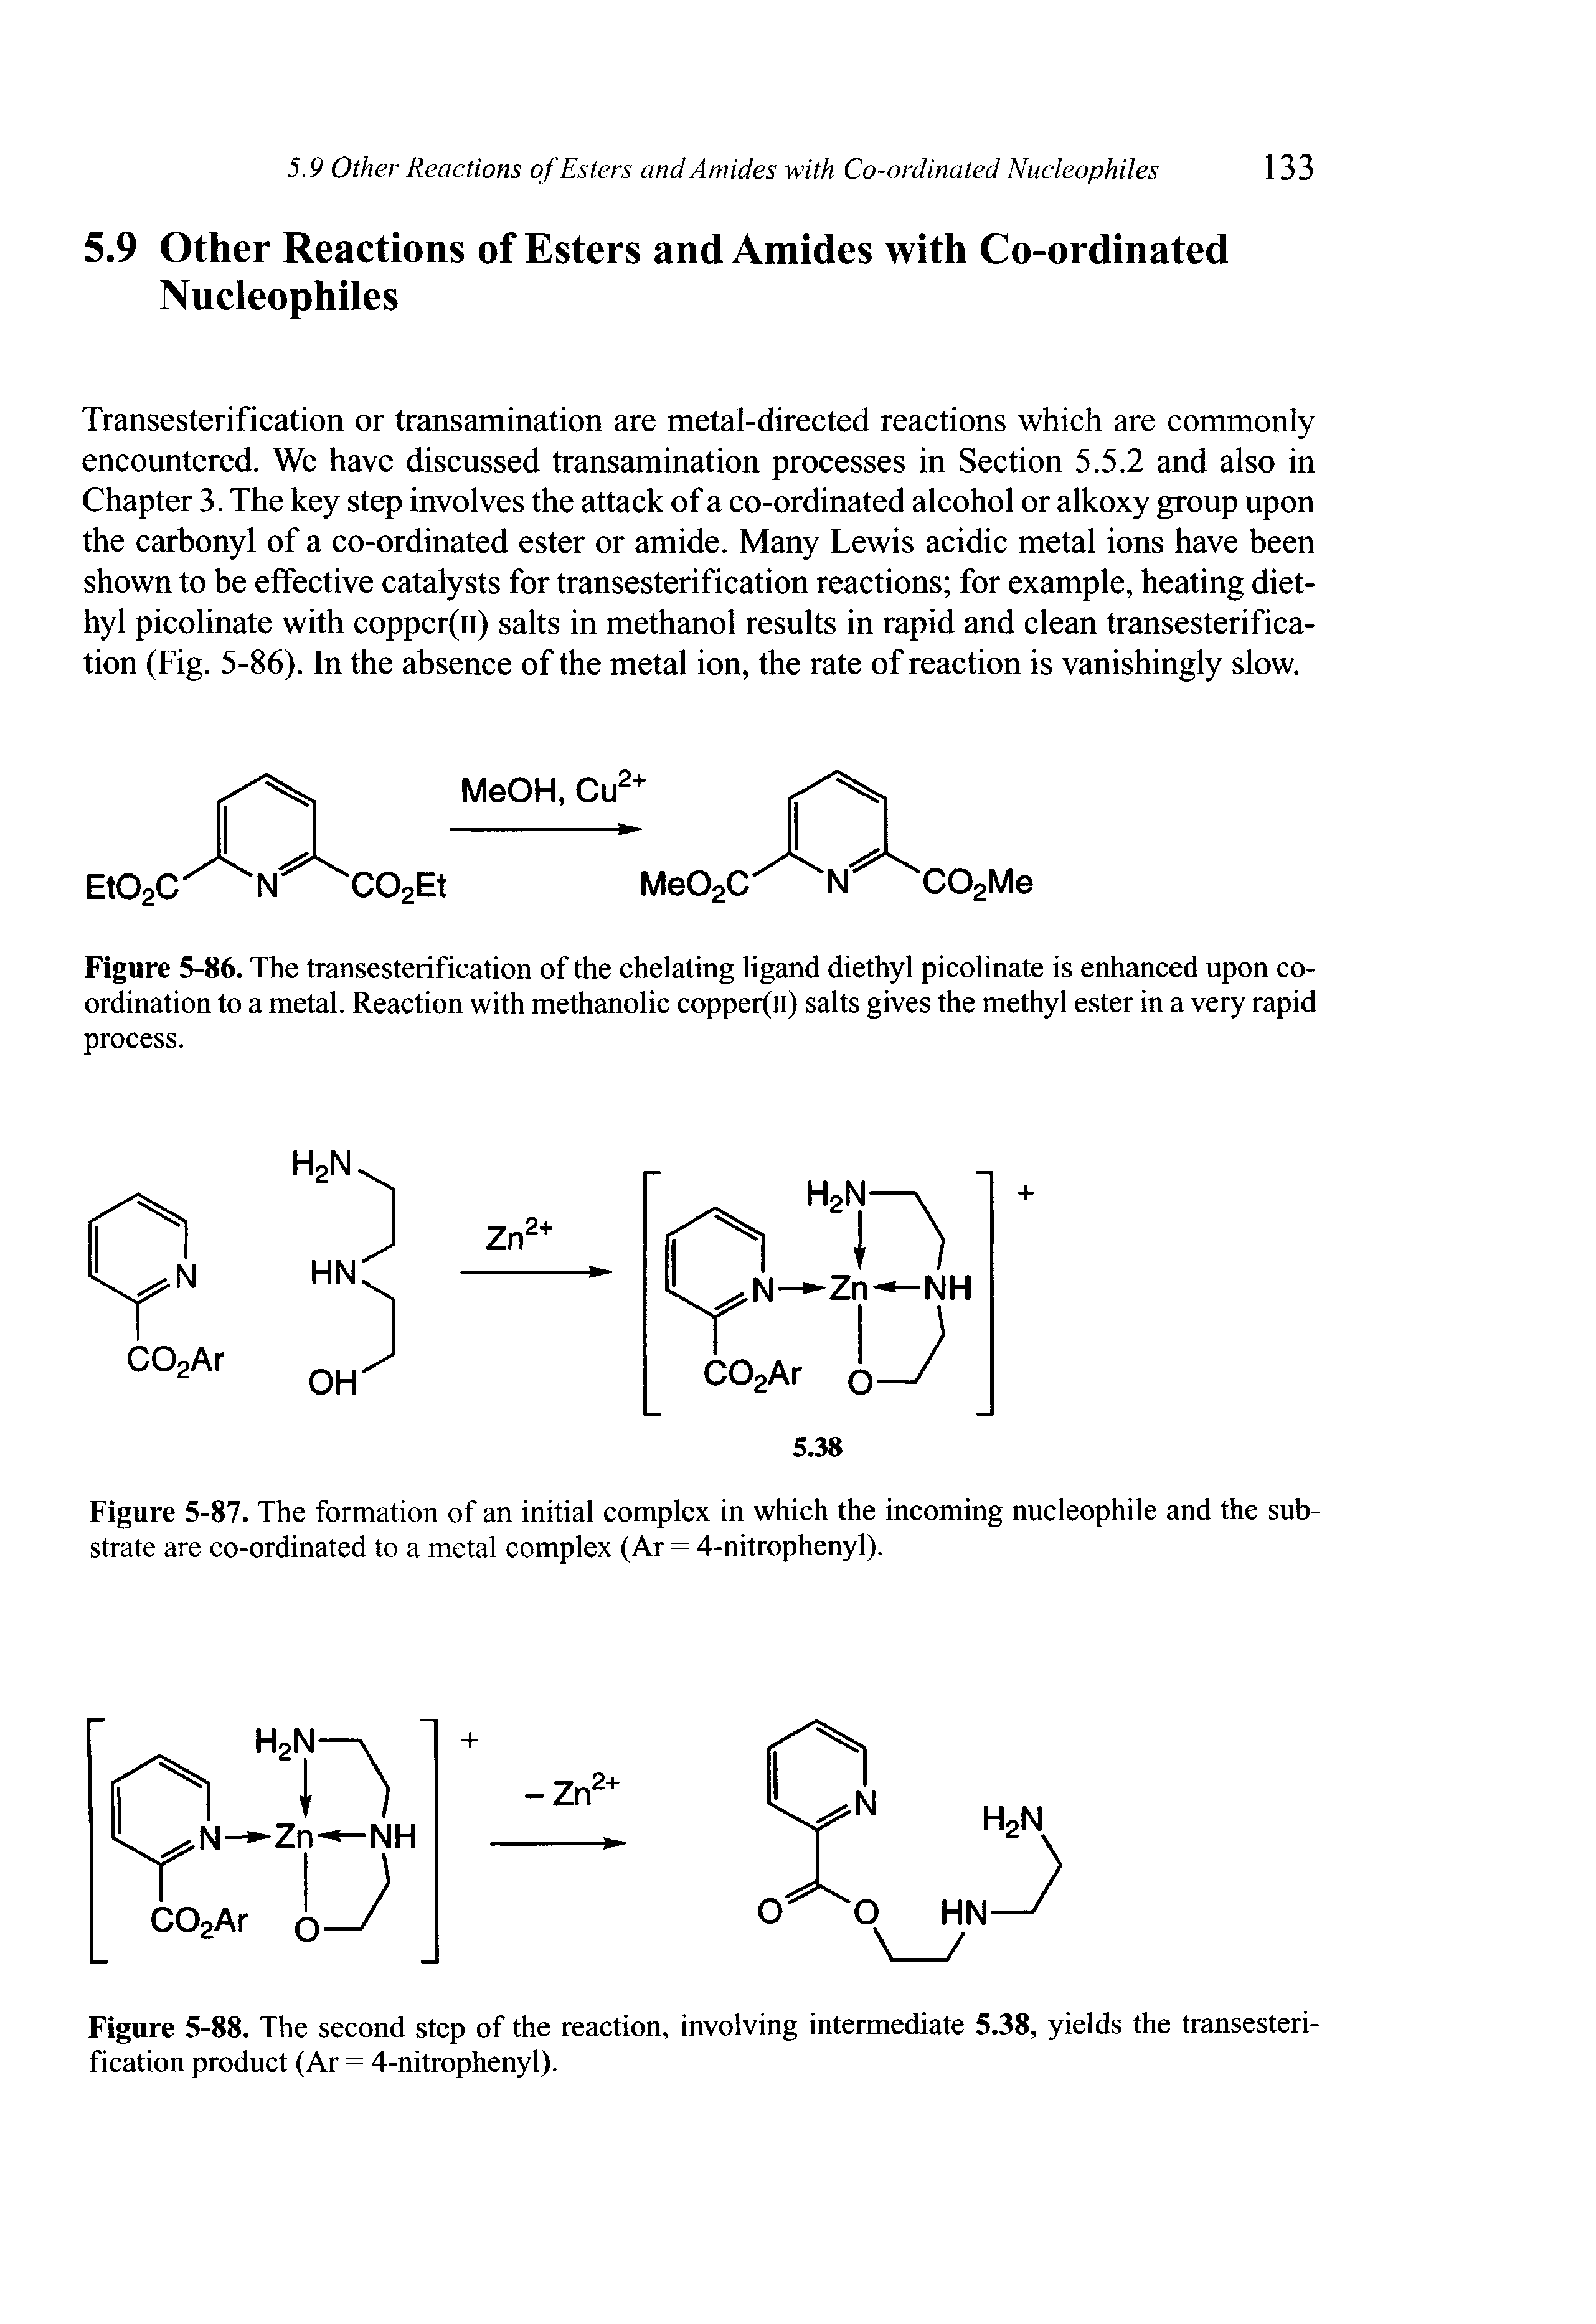 Figure 5-86. The transesterification of the chelating ligand diethyl picolinate is enhanced upon coordination to a metal. Reaction with methanolic copper(u) salts gives the methyl ester in a very rapid process.